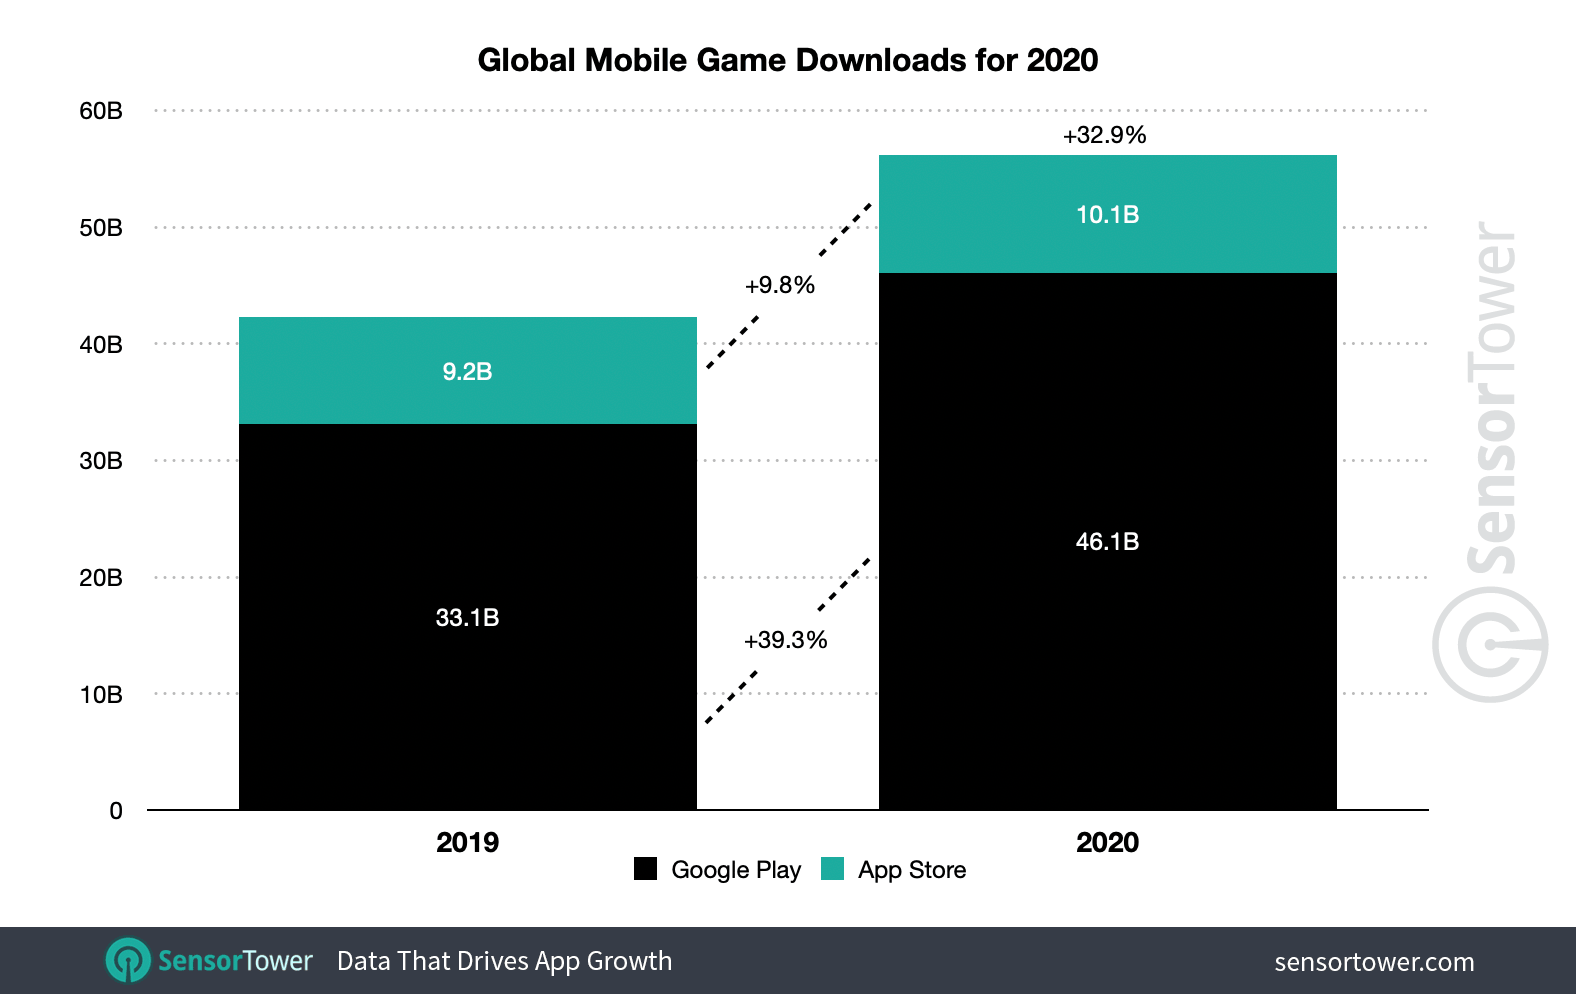 Worldwide downloads of mobile games grew nearly 33 percent to 56.2 billion in 2020.